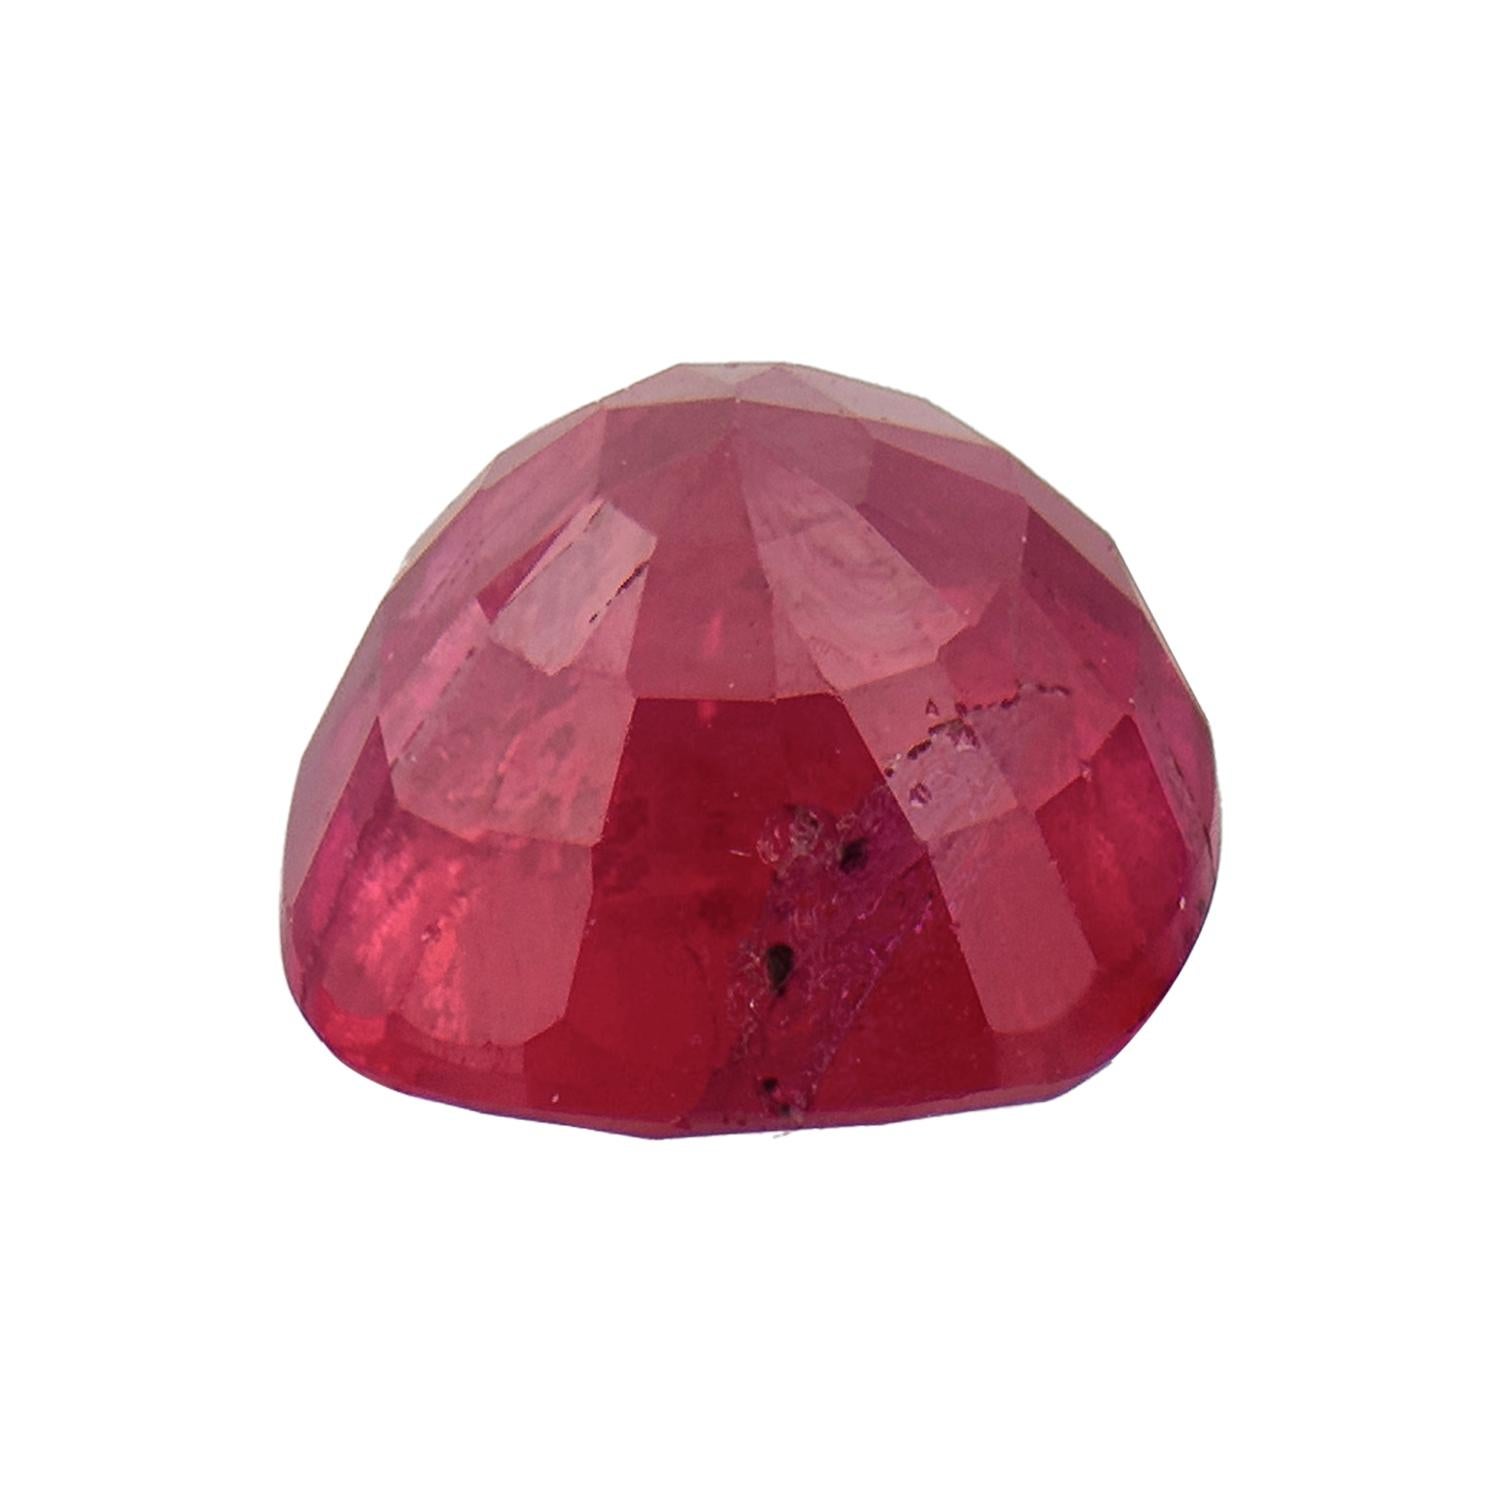 Certified Natural Burmese Ruby Cushion Cut Loose Gemstone for Rings 
Color                 : Vivid Red
Transparency    : Transparent
Shape and Cut  : Cushion Faceted Cut
Weight               : 3,07 Ct's
Measurements  : 8,45 x 7,24 x 5,06 mm
Comments